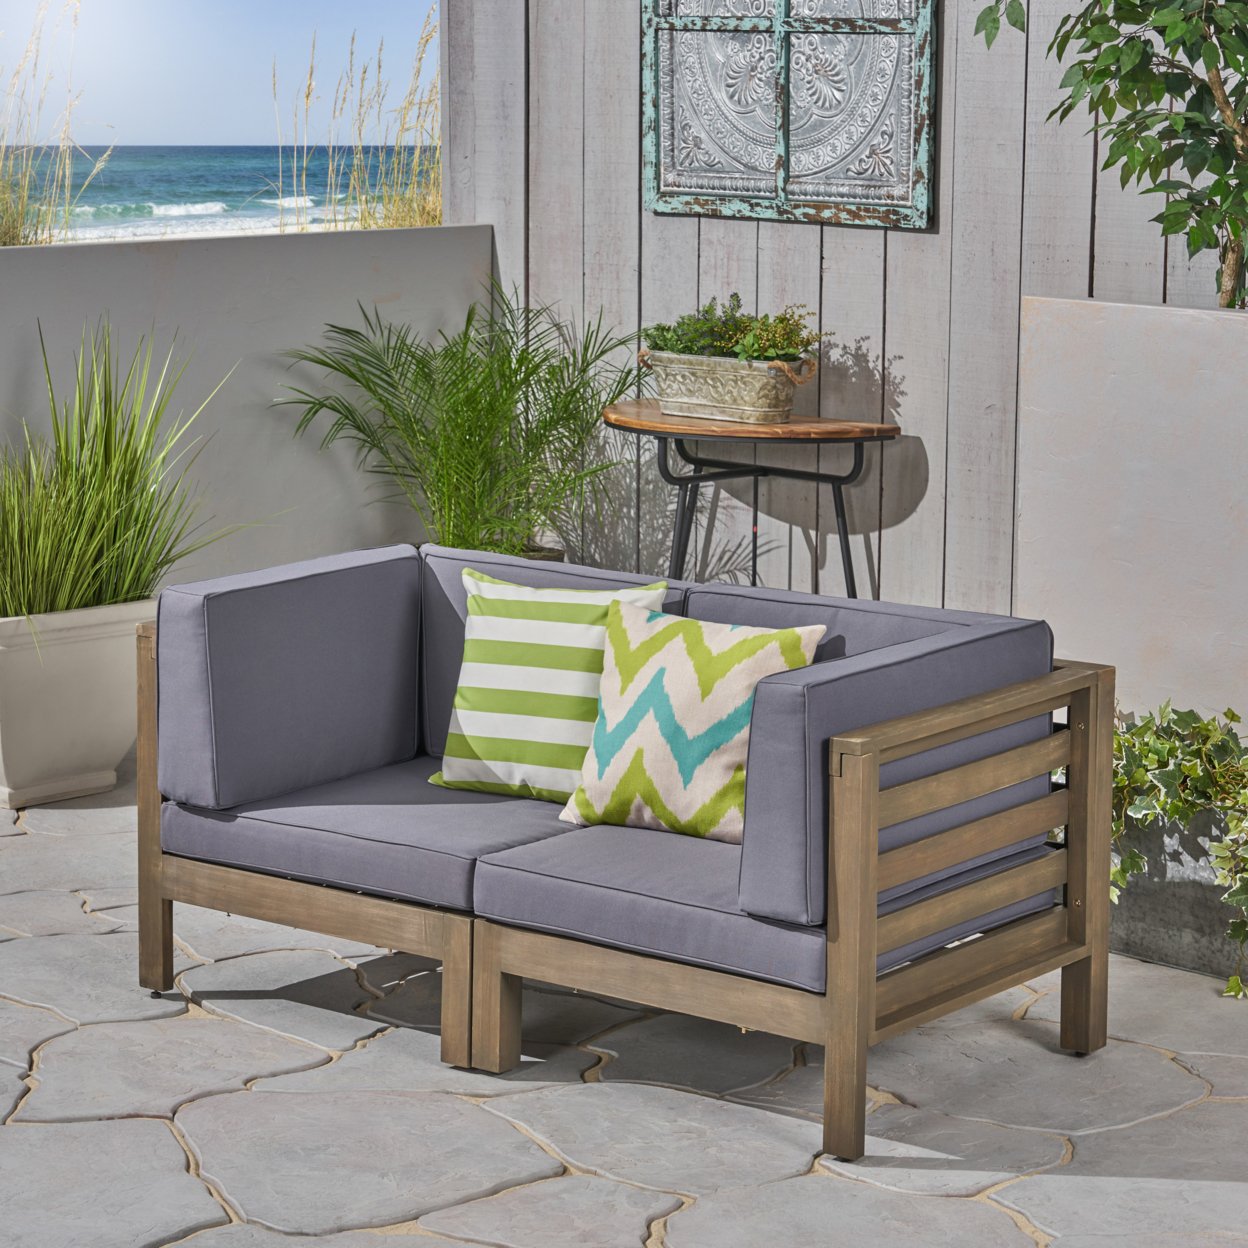 Great Deal Furniture Dawson Outdoor Sectional Loveseat Set - 2-Seater - Acacia Wood - Outdoor Cushions - Teak + Blue